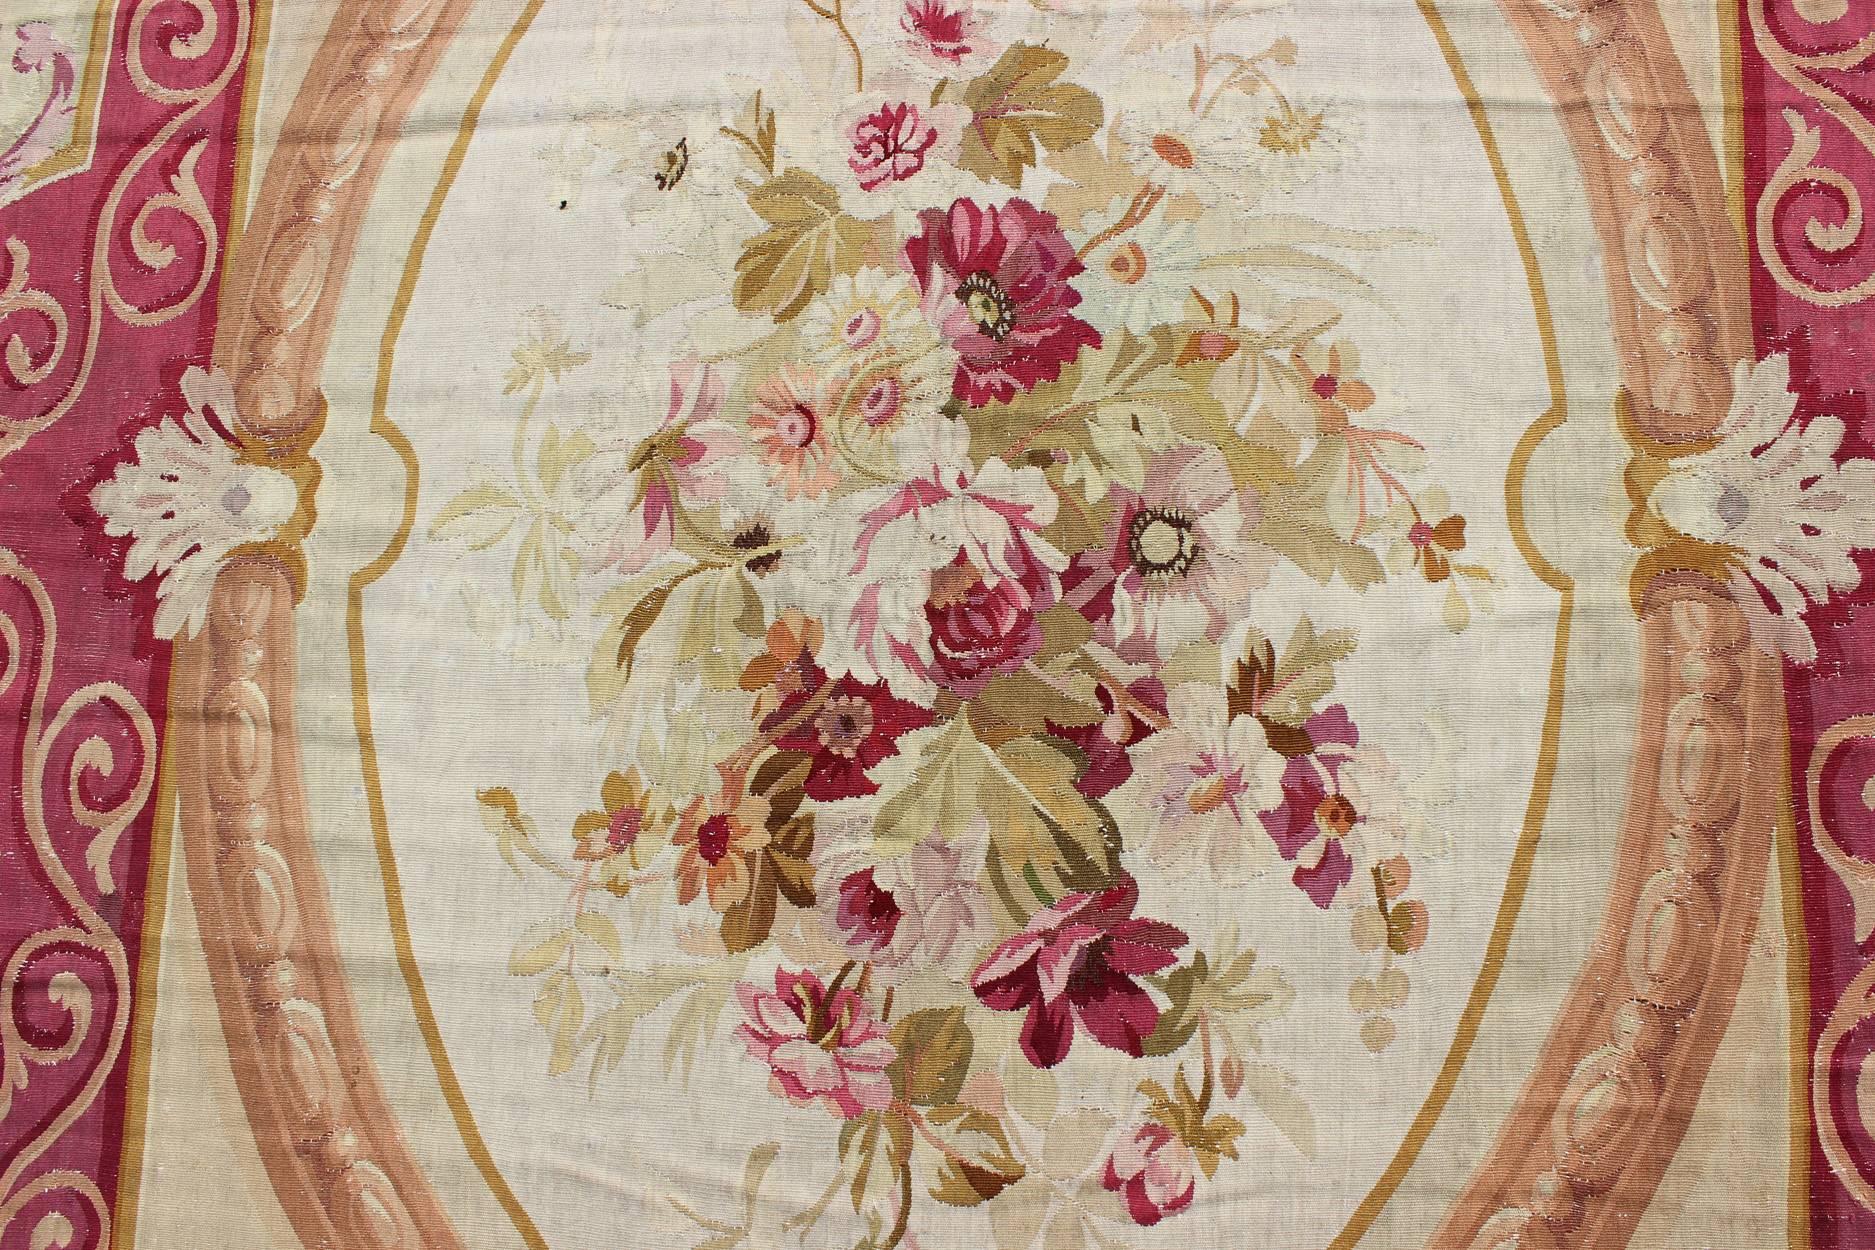 Late 19th Century Antique French Aubusson with Romantic Rose Bouquets in Shades of Red and Pink For Sale